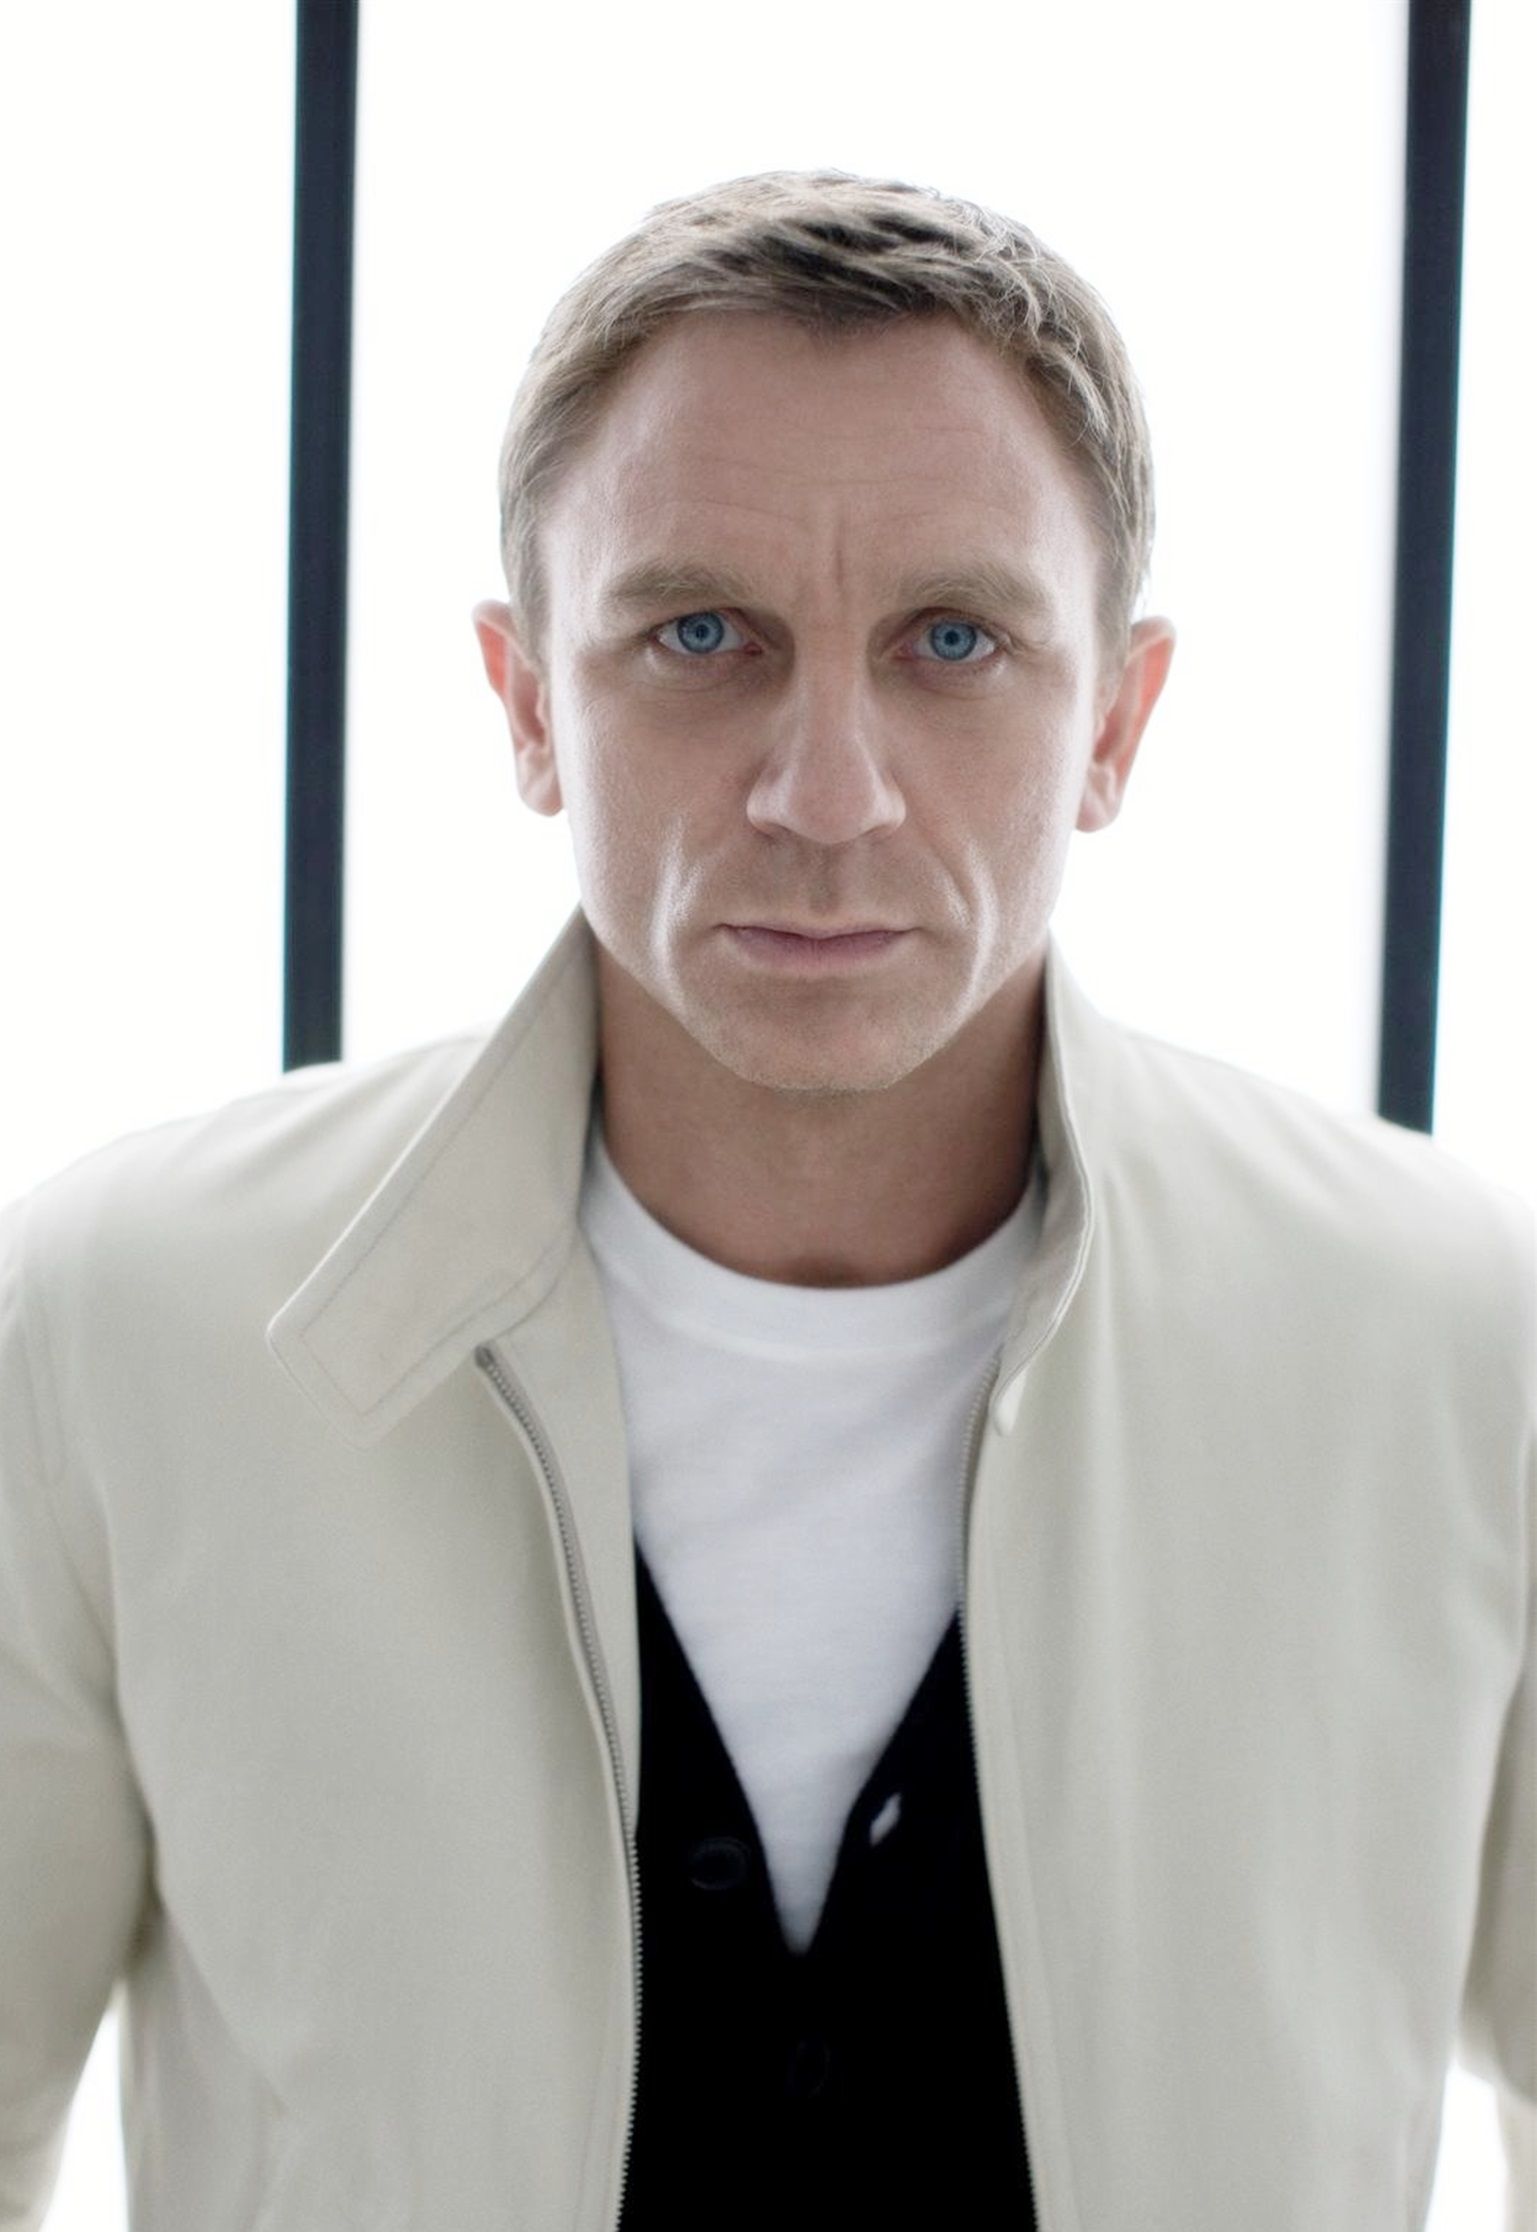 The Other Tom Ford Harrington Jacket in Cream (for Daniel Craig)| Review